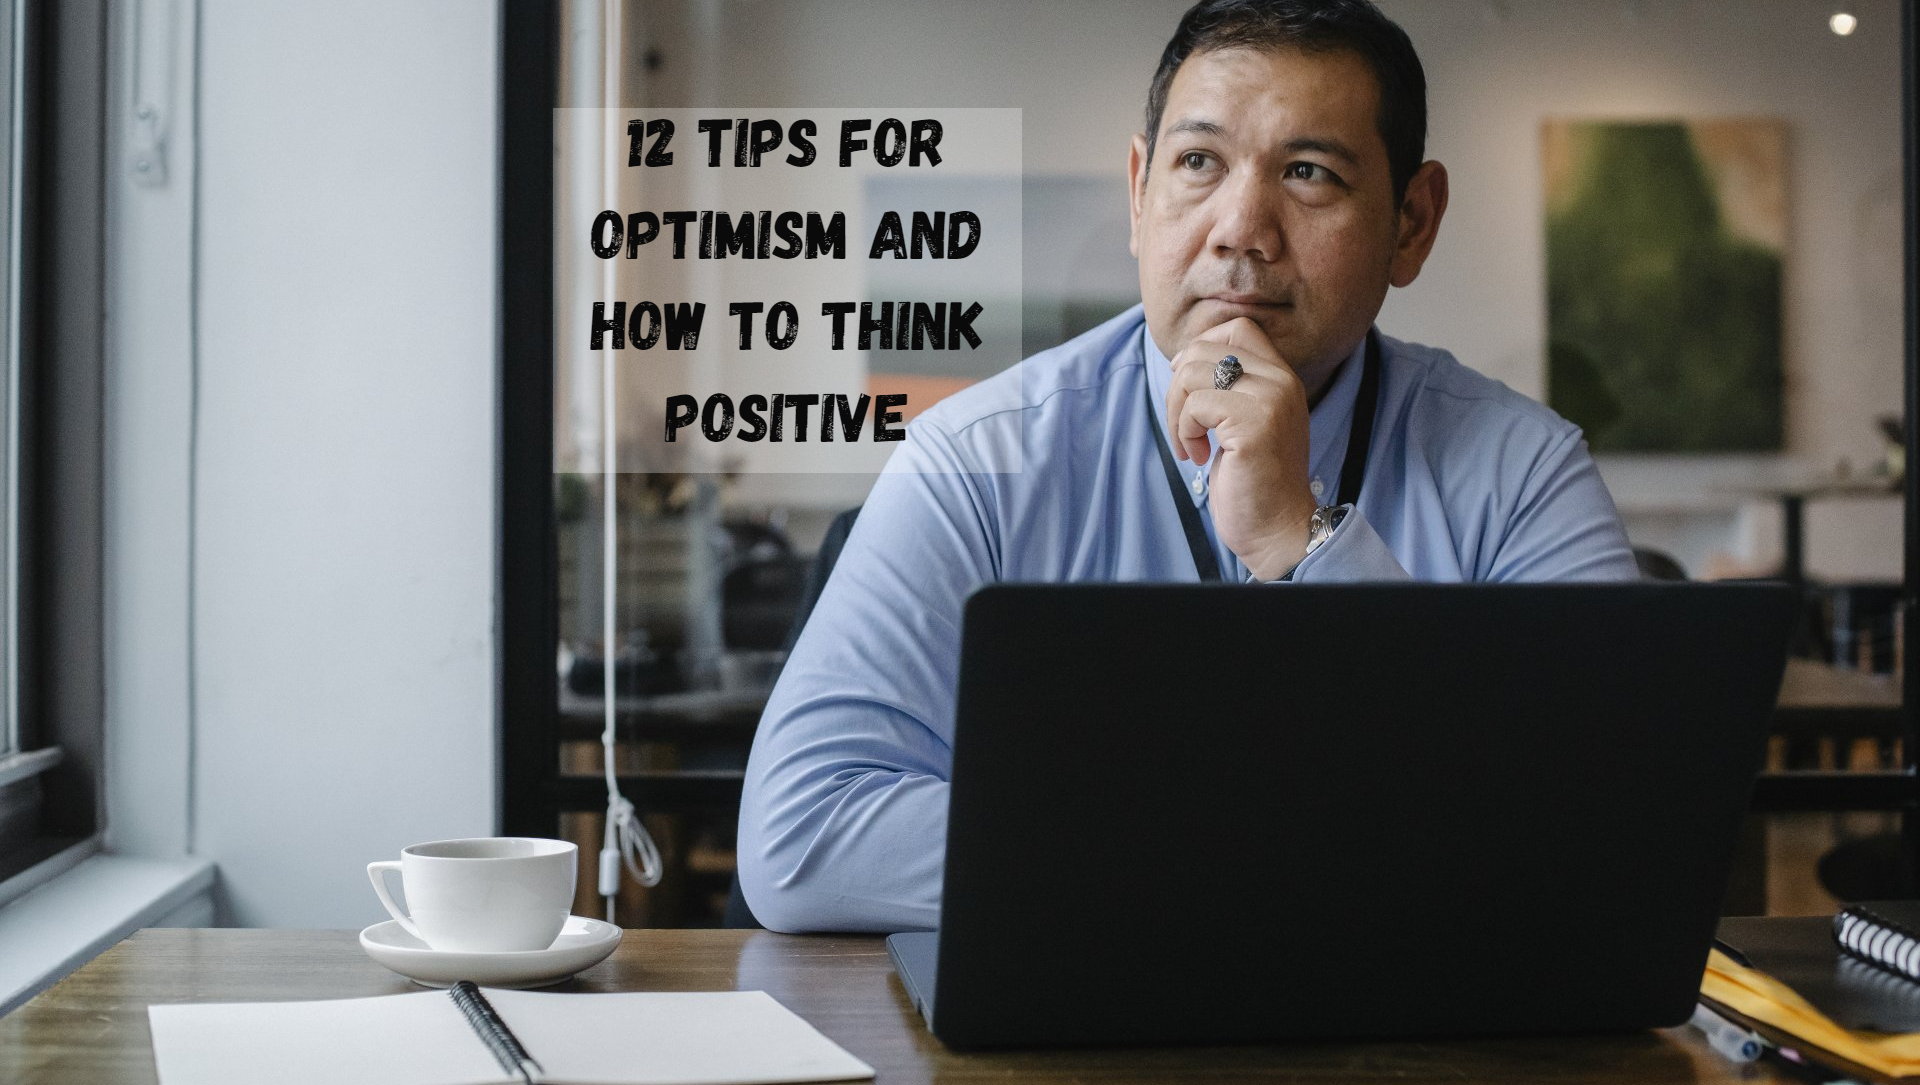 12 tips for optimism and how to think positive by coachAOG